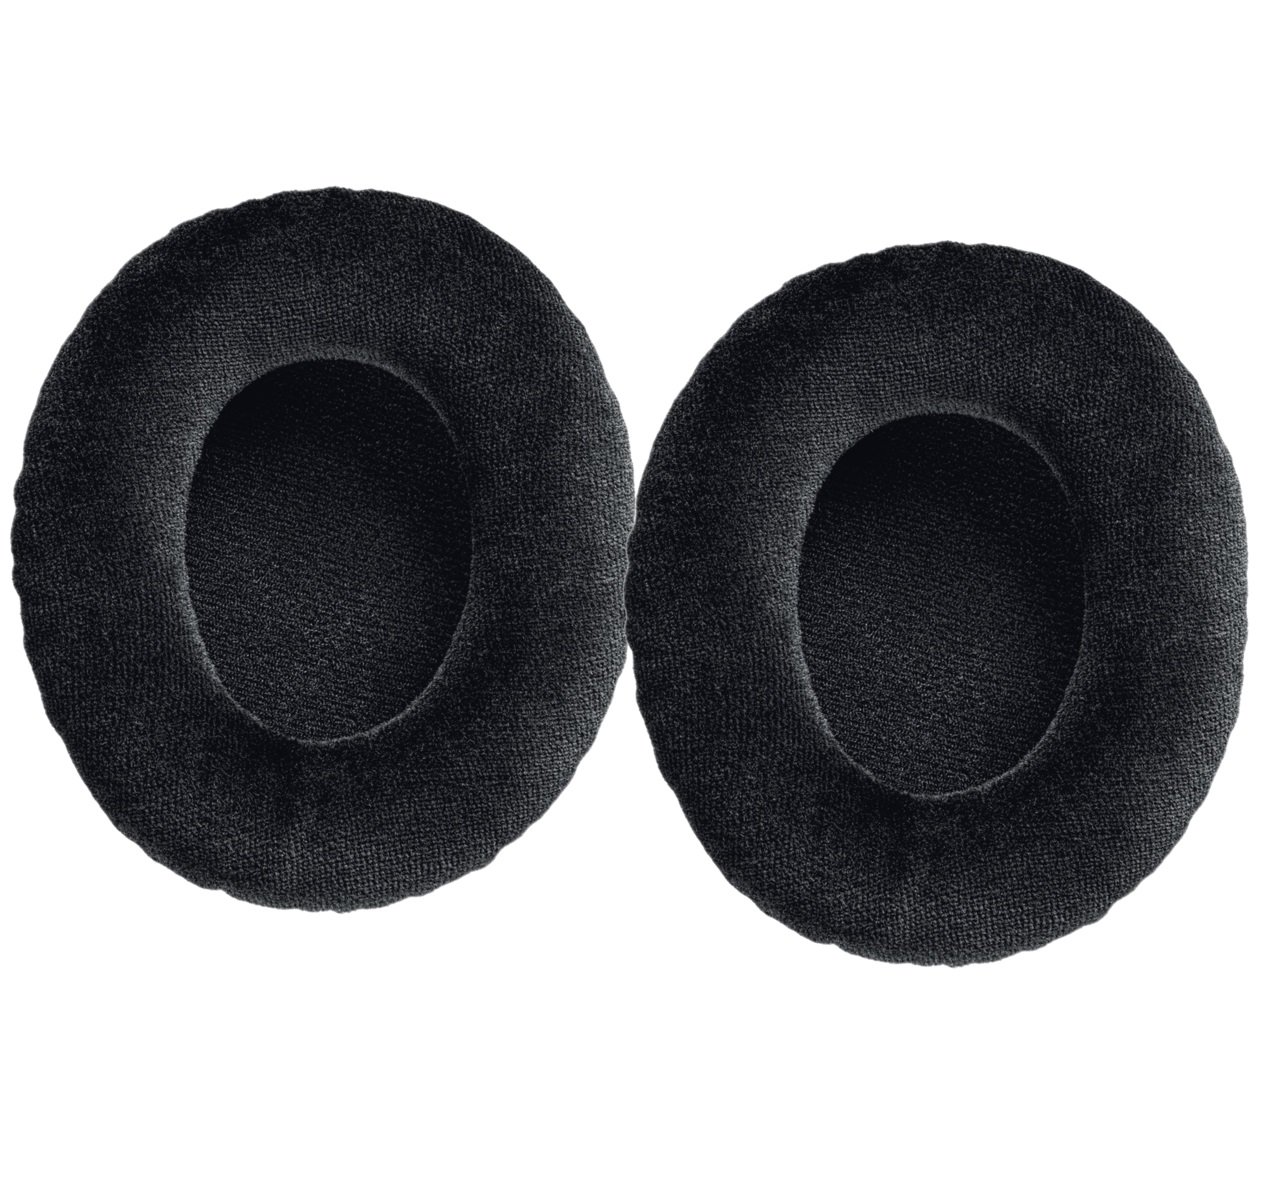 Photos - Other Sound & Hi-Fi Shure HPAEC1440 Replacement Ear Cushions for SRH1440 Headphones, Pair 